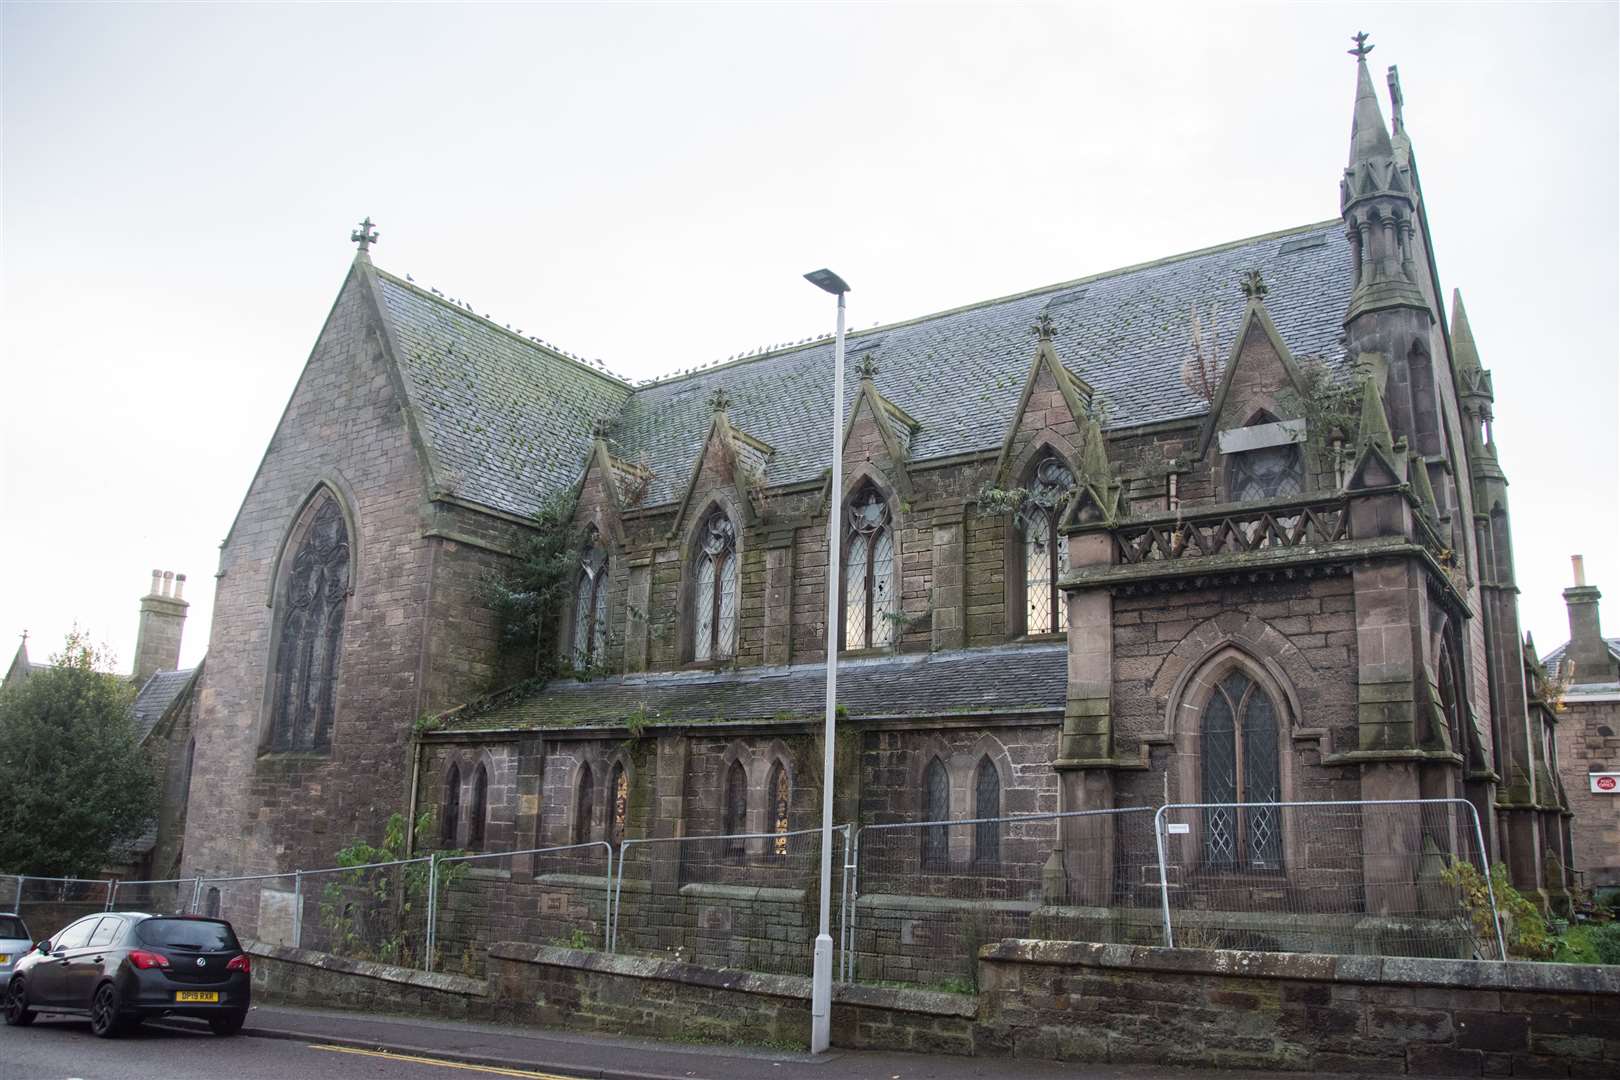 Moray Council has been unable to contact Castlehill Church owner, Claire Love.